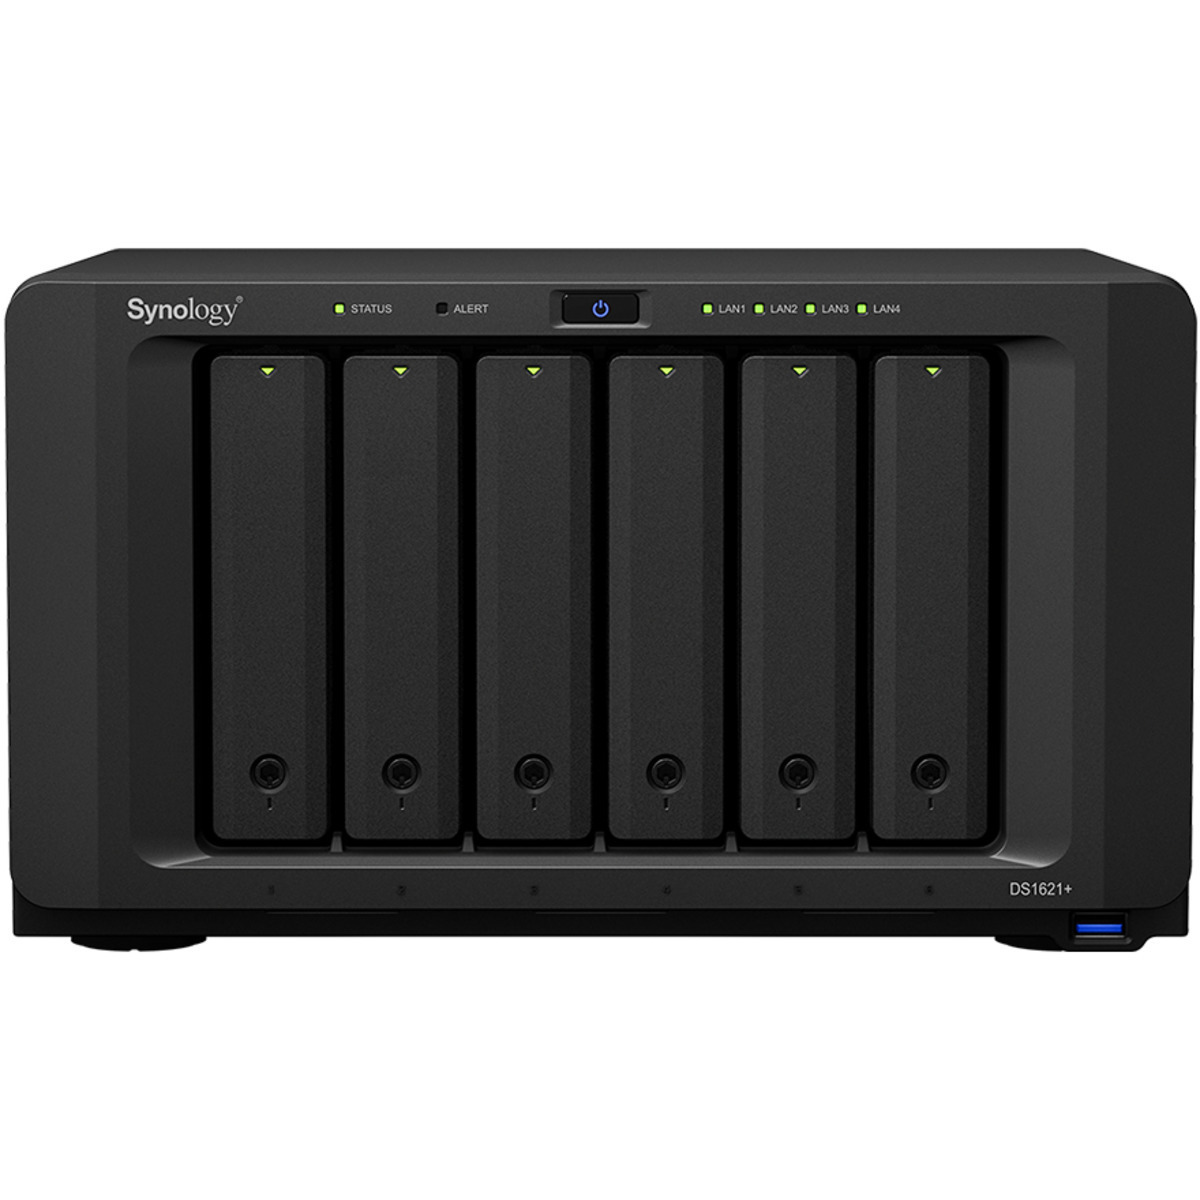 Synology DiskStation DS1621+ 88tb 6-Bay Desktop Multimedia / Power User / Business NAS - Network Attached Storage Device 4x22tb Seagate EXOS X22 ST22000NM001E 3.5 7200rpm SATA 6Gb/s HDD ENTERPRISE Class Drives Installed - Burn-In Tested - FREE RAM UPGRADE DiskStation DS1621+